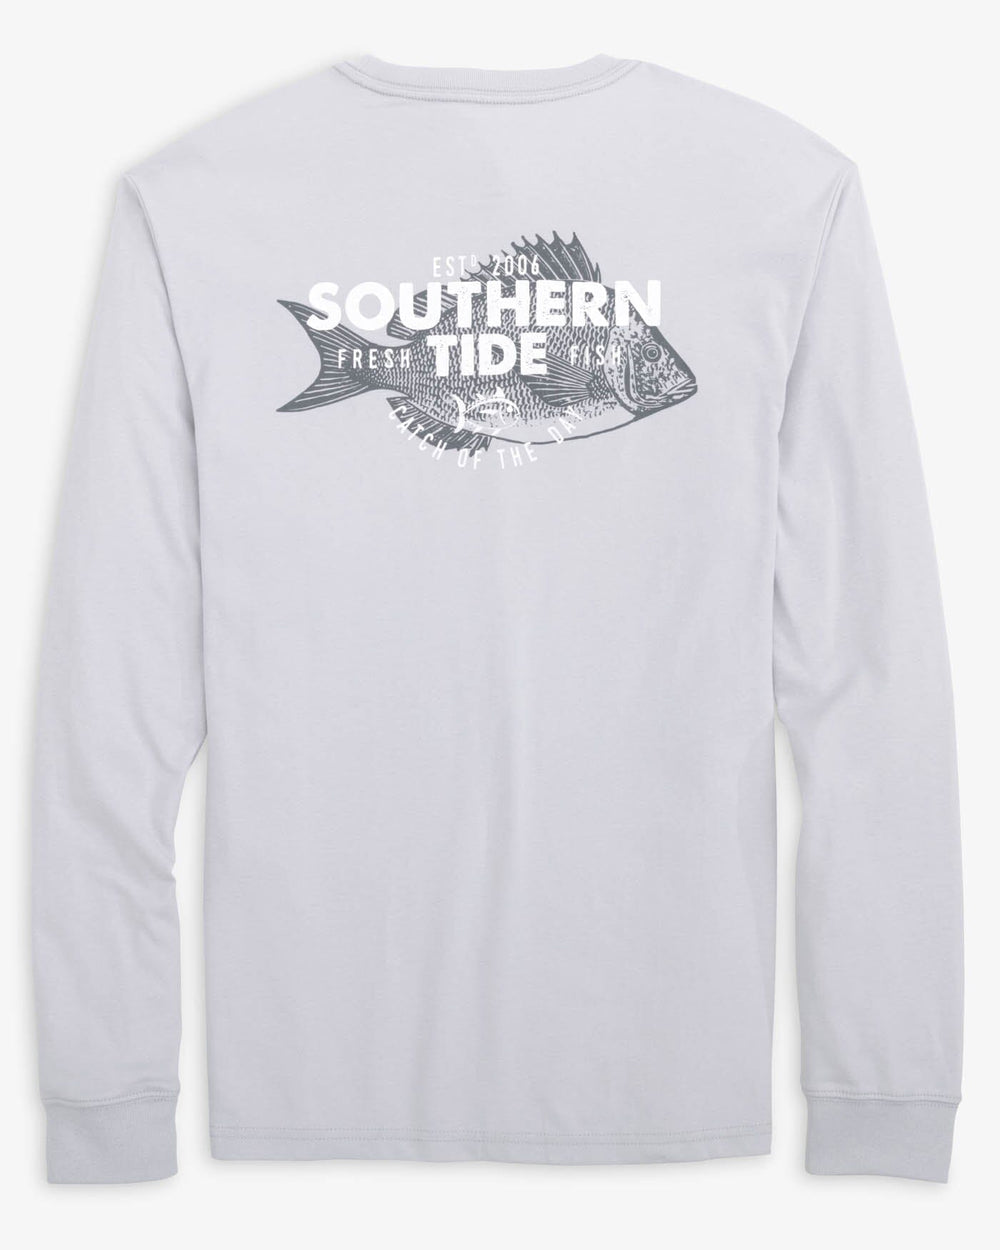 Mens LS Catch of the Day Tee Platinum Grey